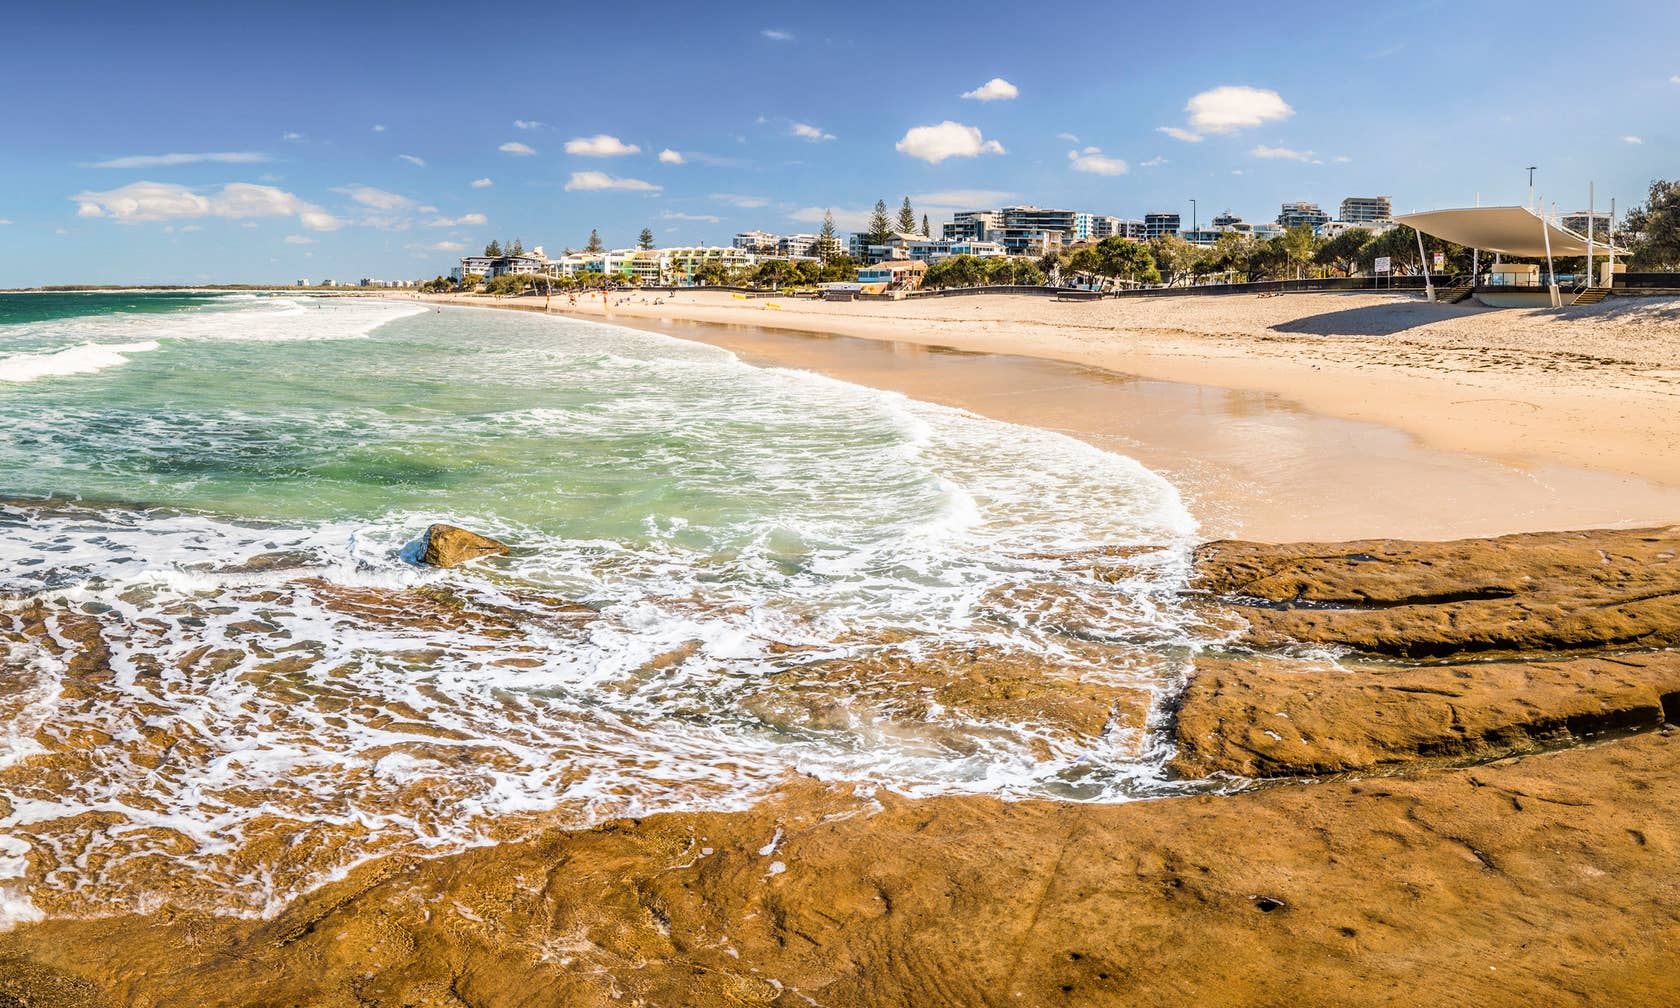 Holiday rental houses in Caloundra